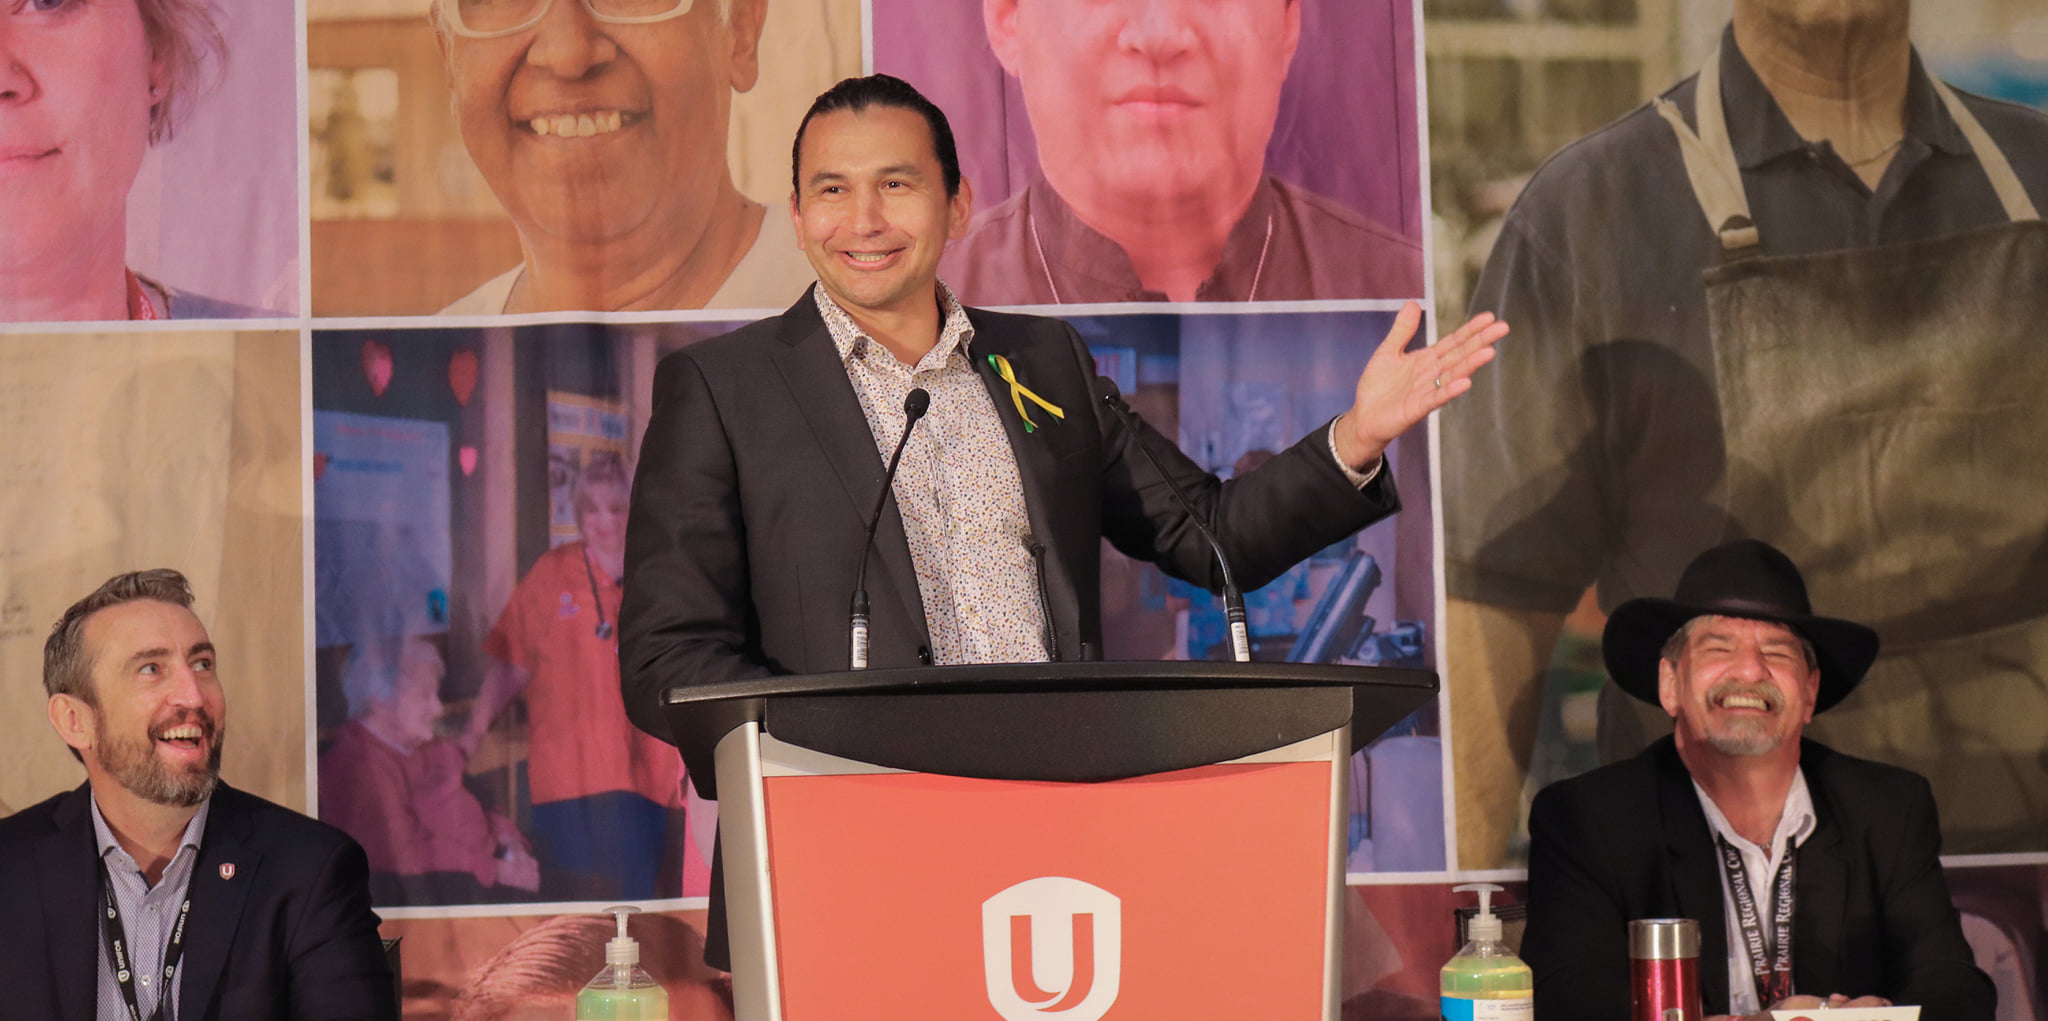 Wab Kinew smiling at a podium with Gavin McGarrigle and Guy Desforges seated on either side.